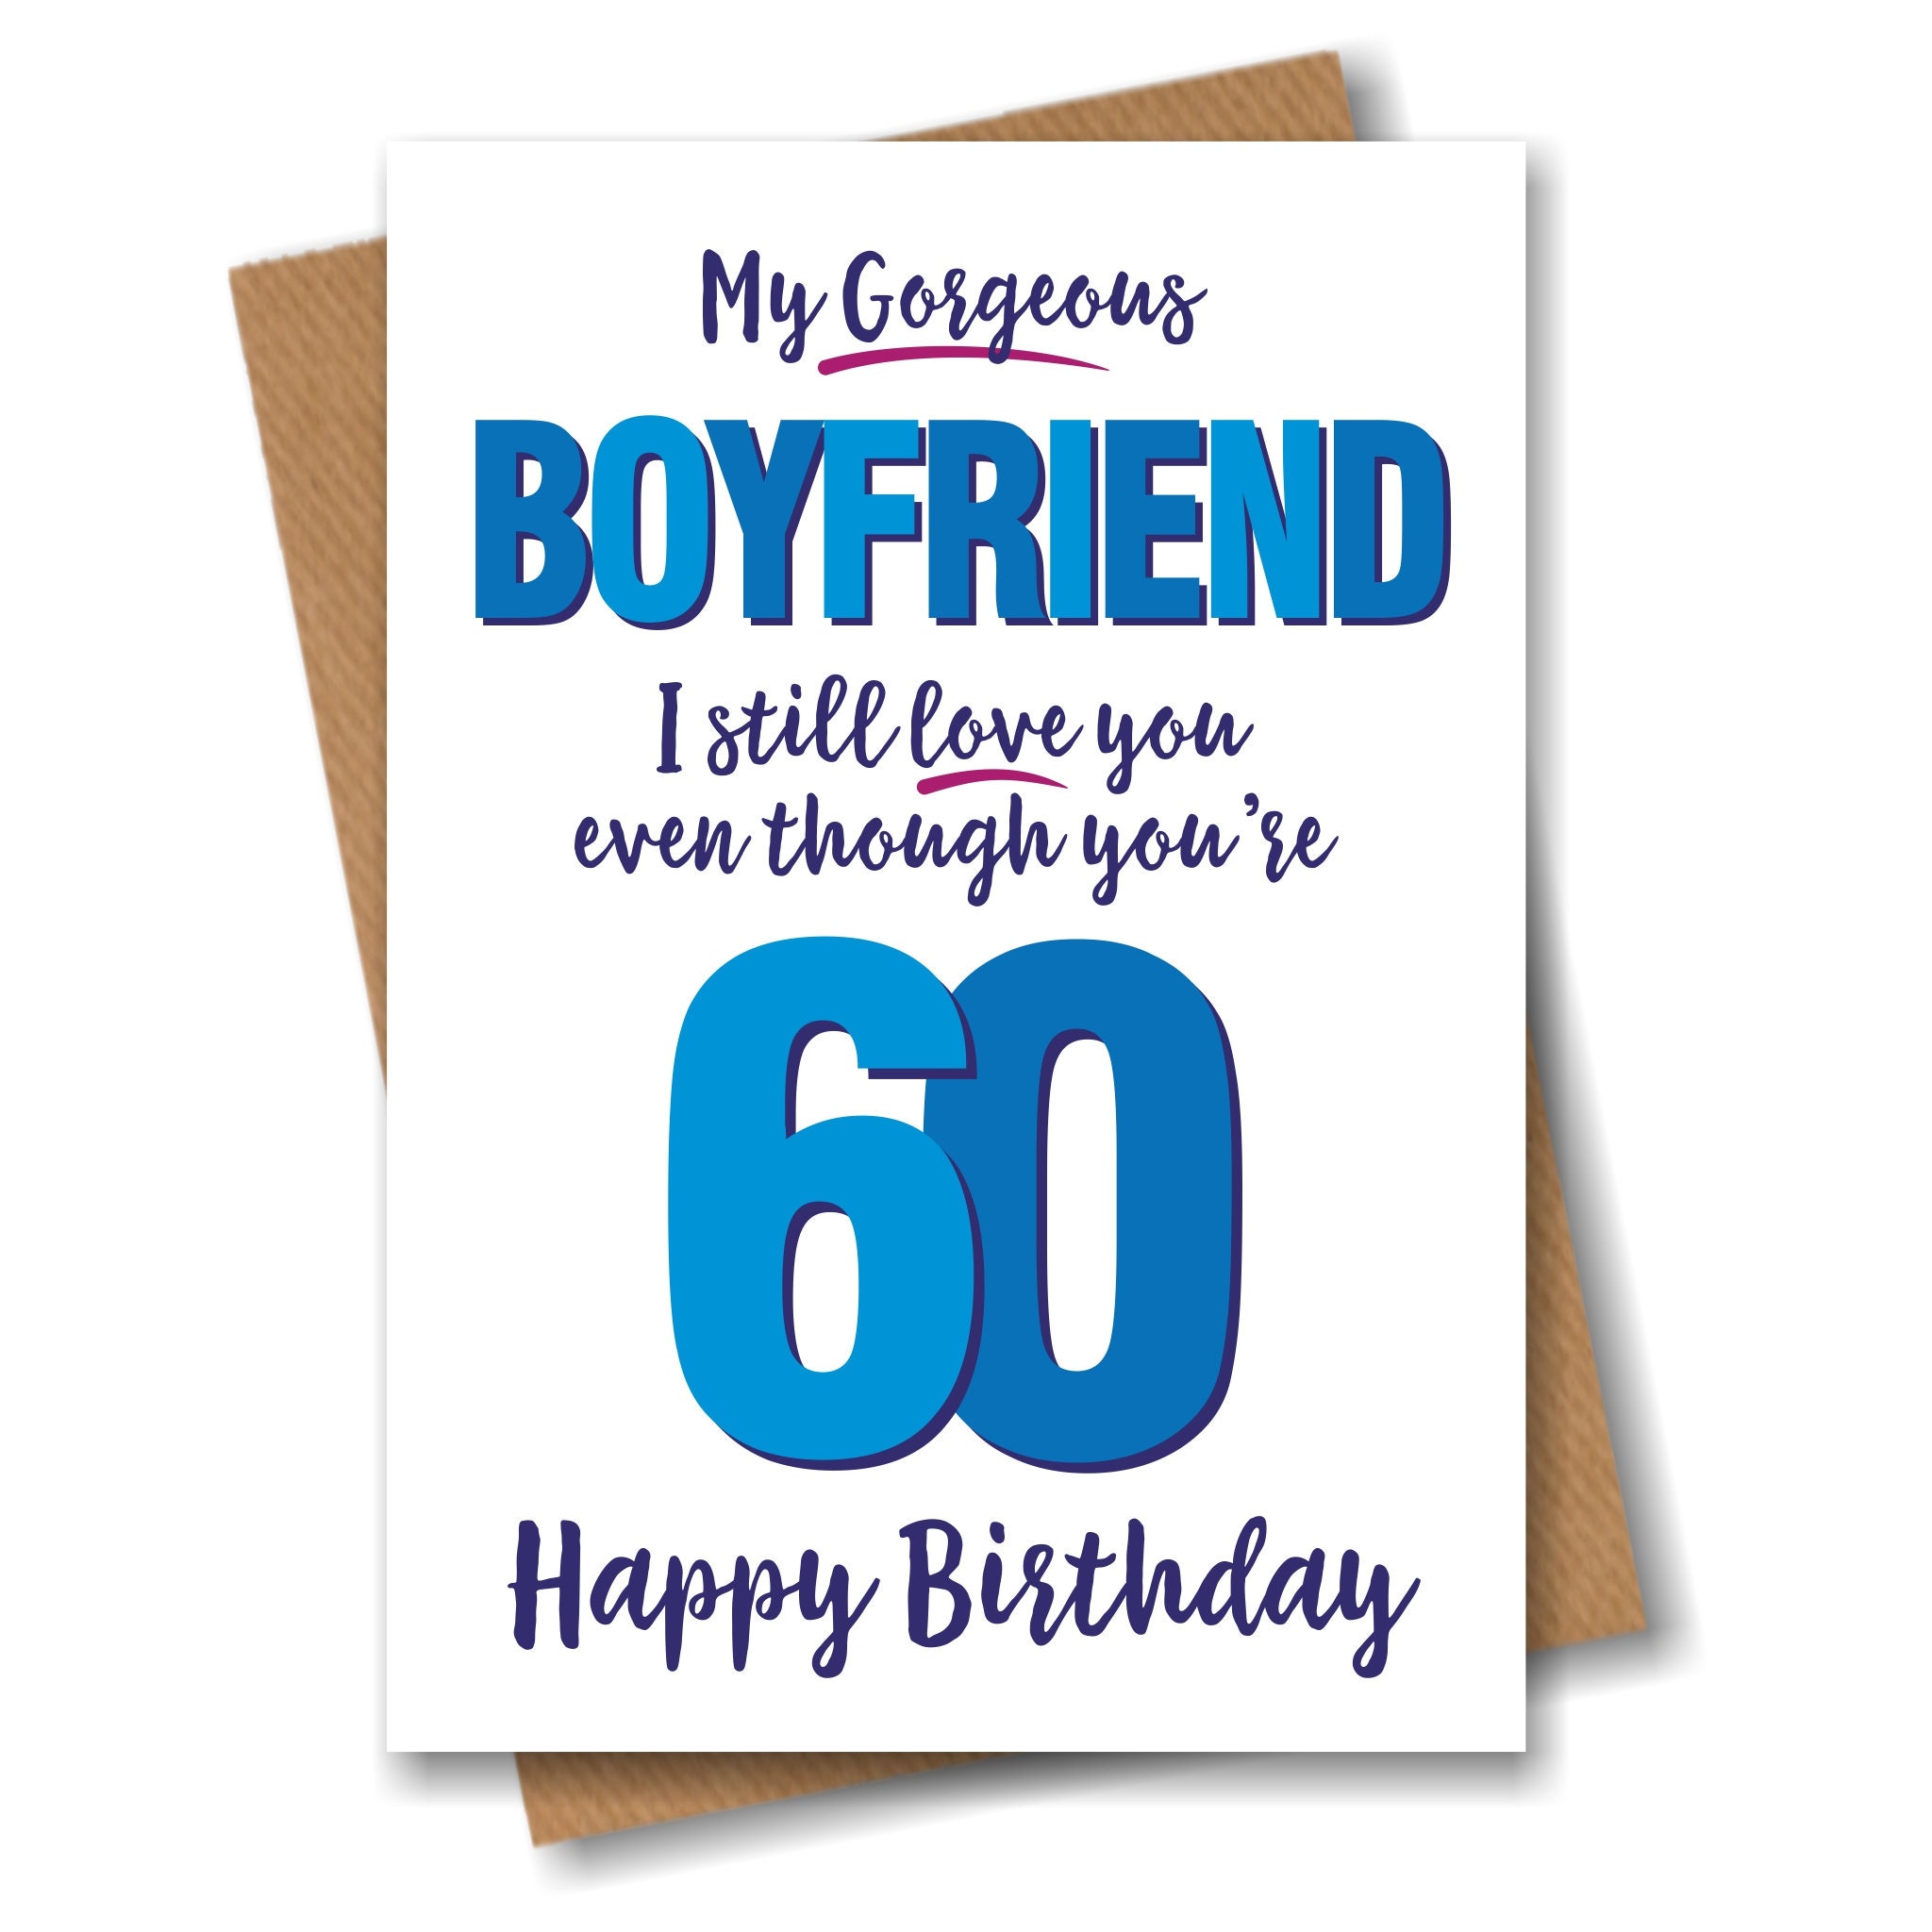 60 Birthday Captions for Your Boyfriend to Make Him Smile